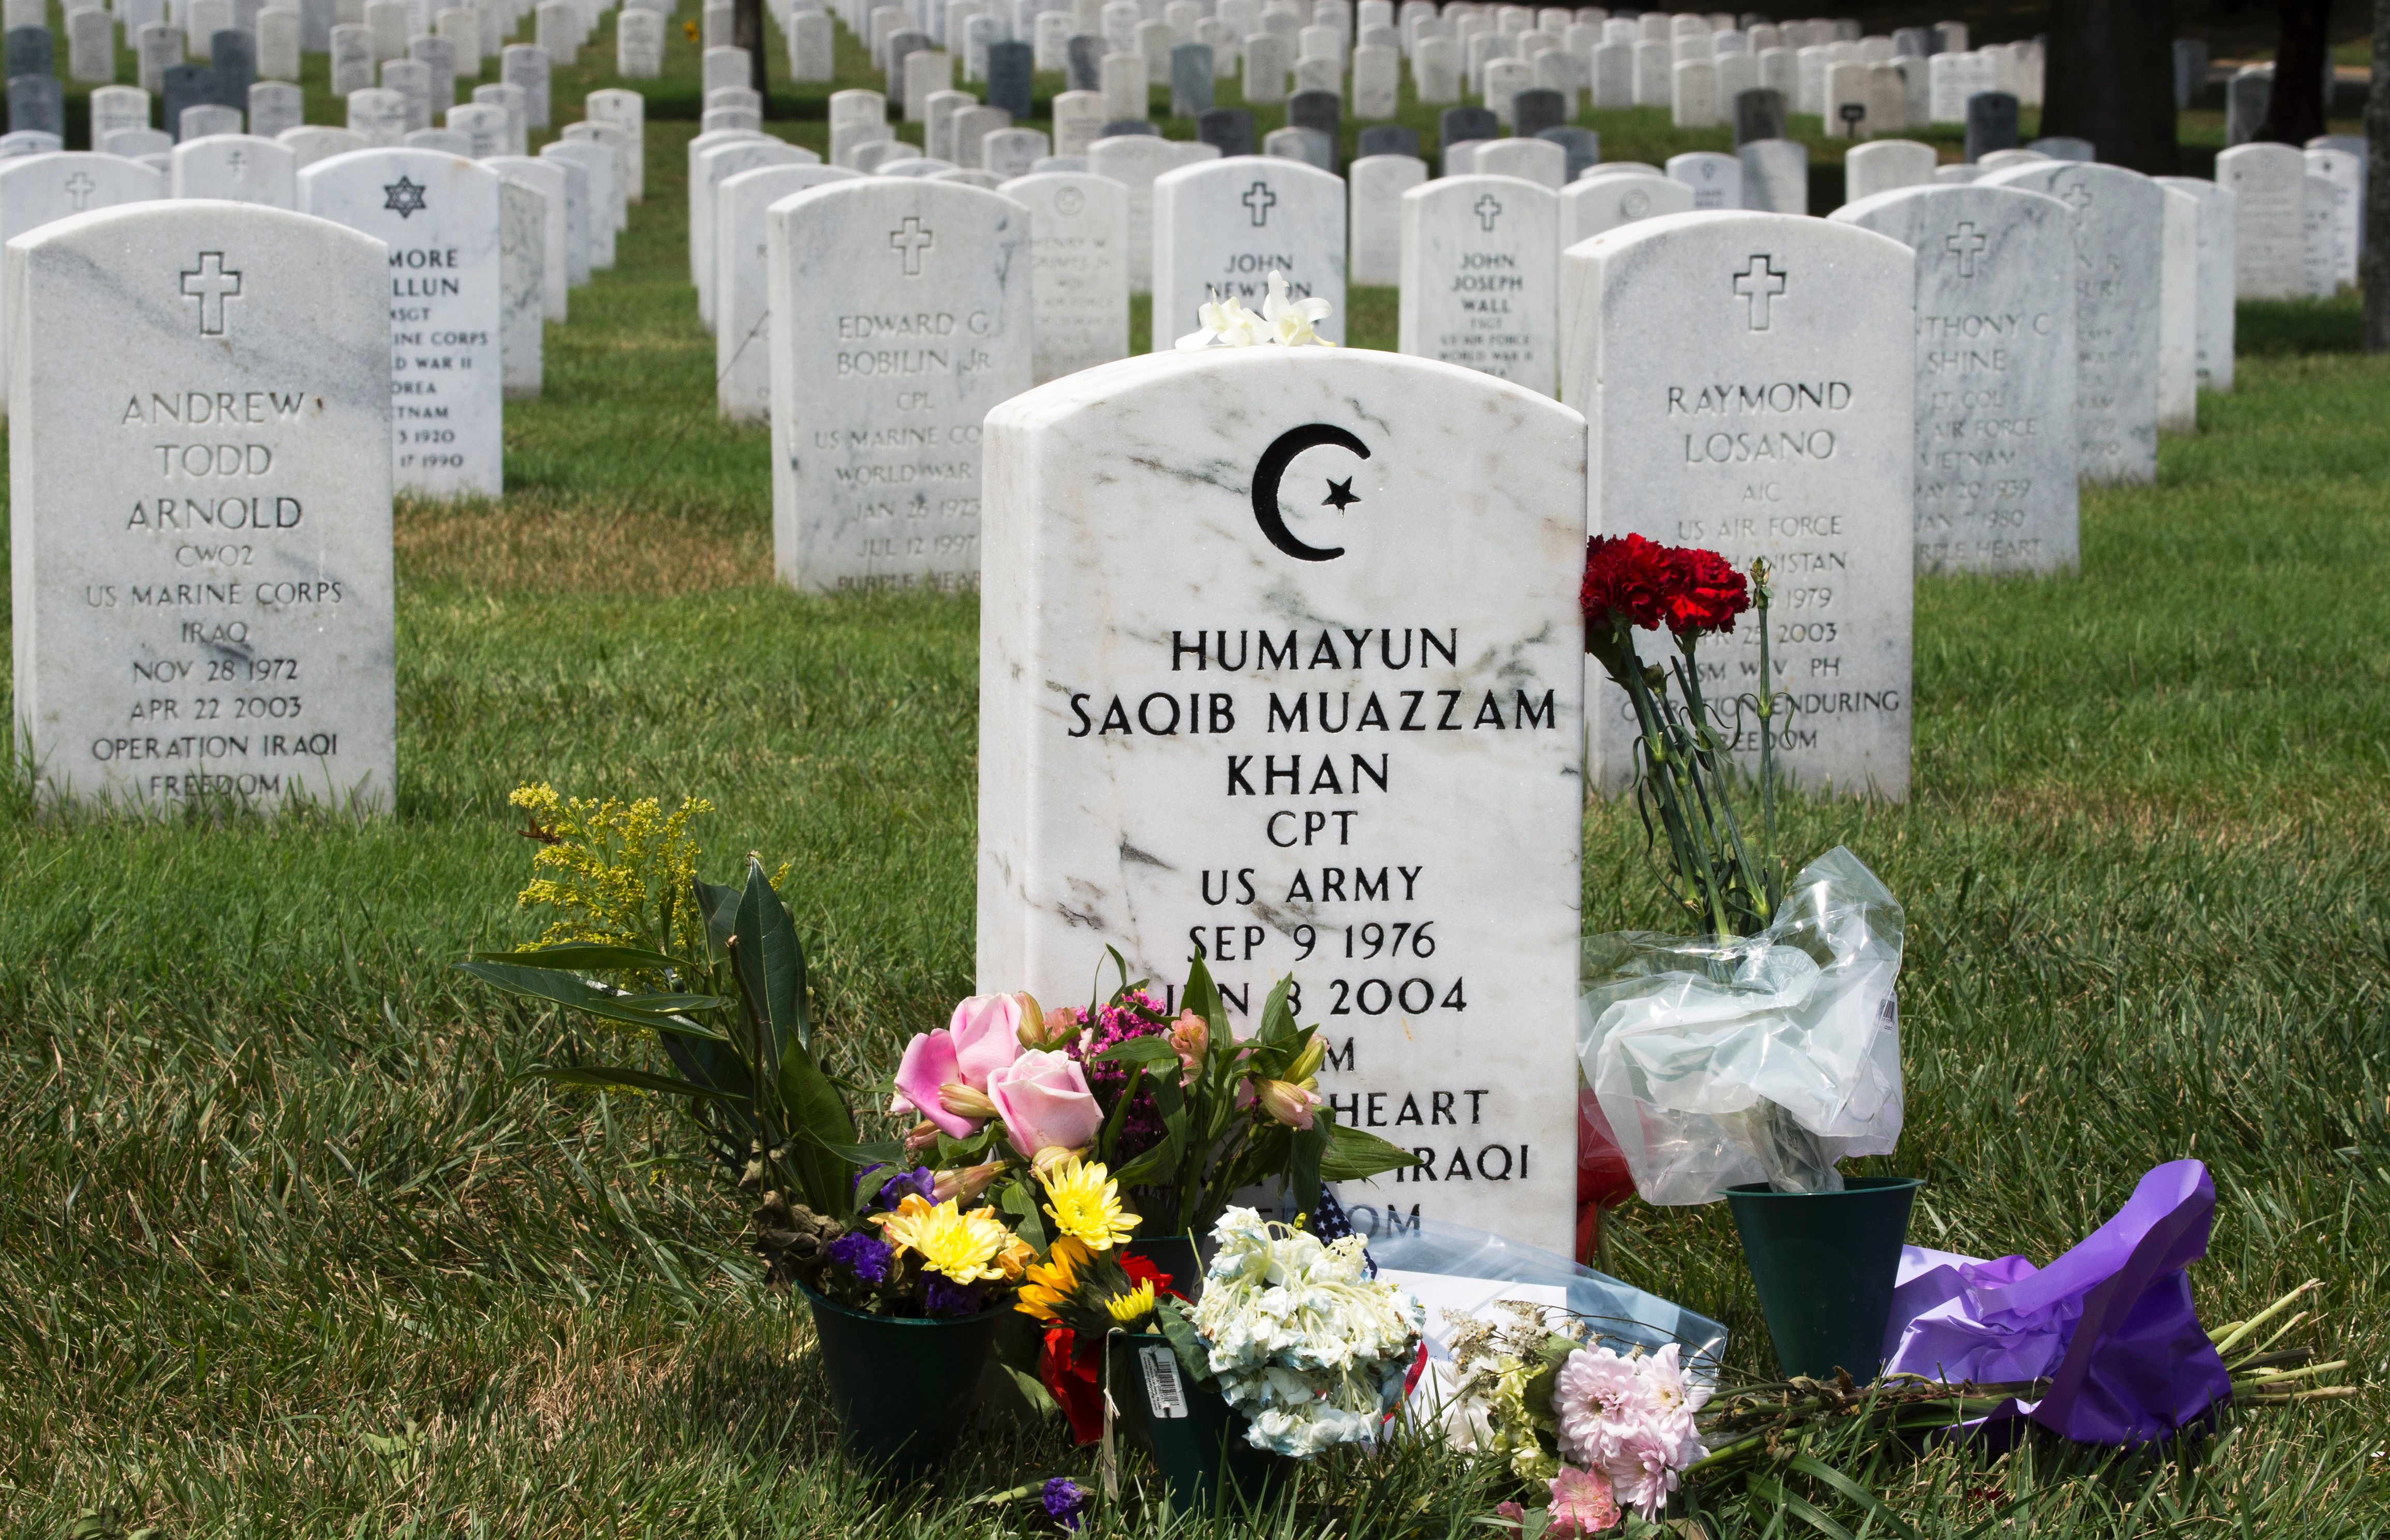 The grave marker for US Army Captain Humayun Saqib Muazzam Khan,who was killed in Iraq in 2004 in a roadside explosion, is seen August 1, 2016, in Section 60 of Arlington National Cemetery in Arlington, Virginia. The father of a slain Muslim American soldier assailed Donald Trump as a "black soul" July 31 in an impassioned exchange with the Republican presidential candidate over the qualities required in a US leader. Khizr Khan electrified the Democratic convention last week with a tribute to his fallen son that ended with a steely rebuke that Trump had "sacrificed nothing" for his country. Photo:   AFP / Paul J. Richards/Getty Images.        